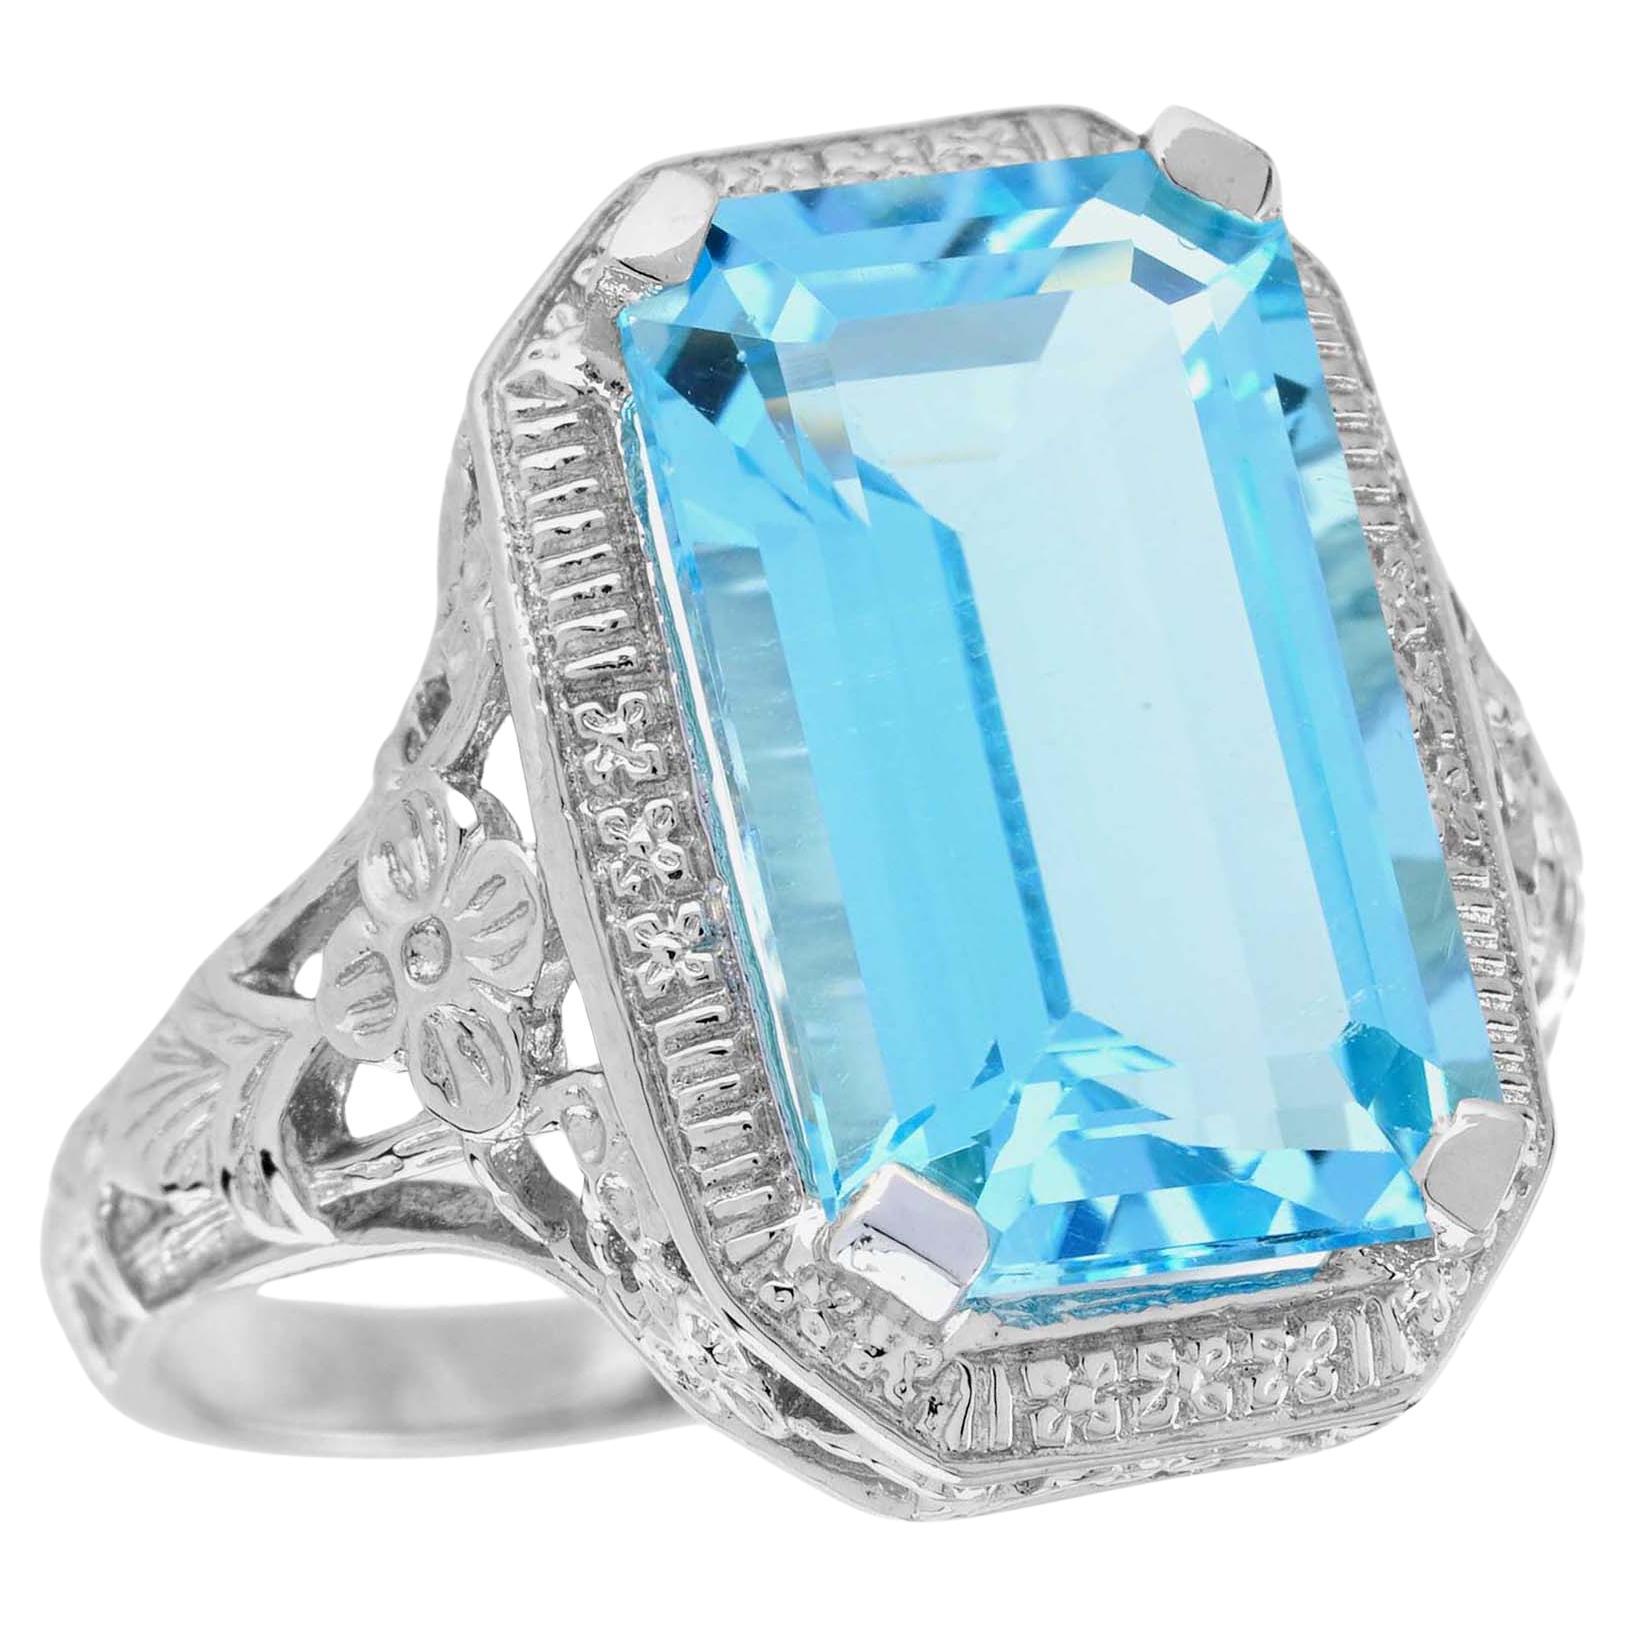 10 Ct. Natural Blue Topaz Vintage Style Cocktail Ring in Solid 9K White Gold